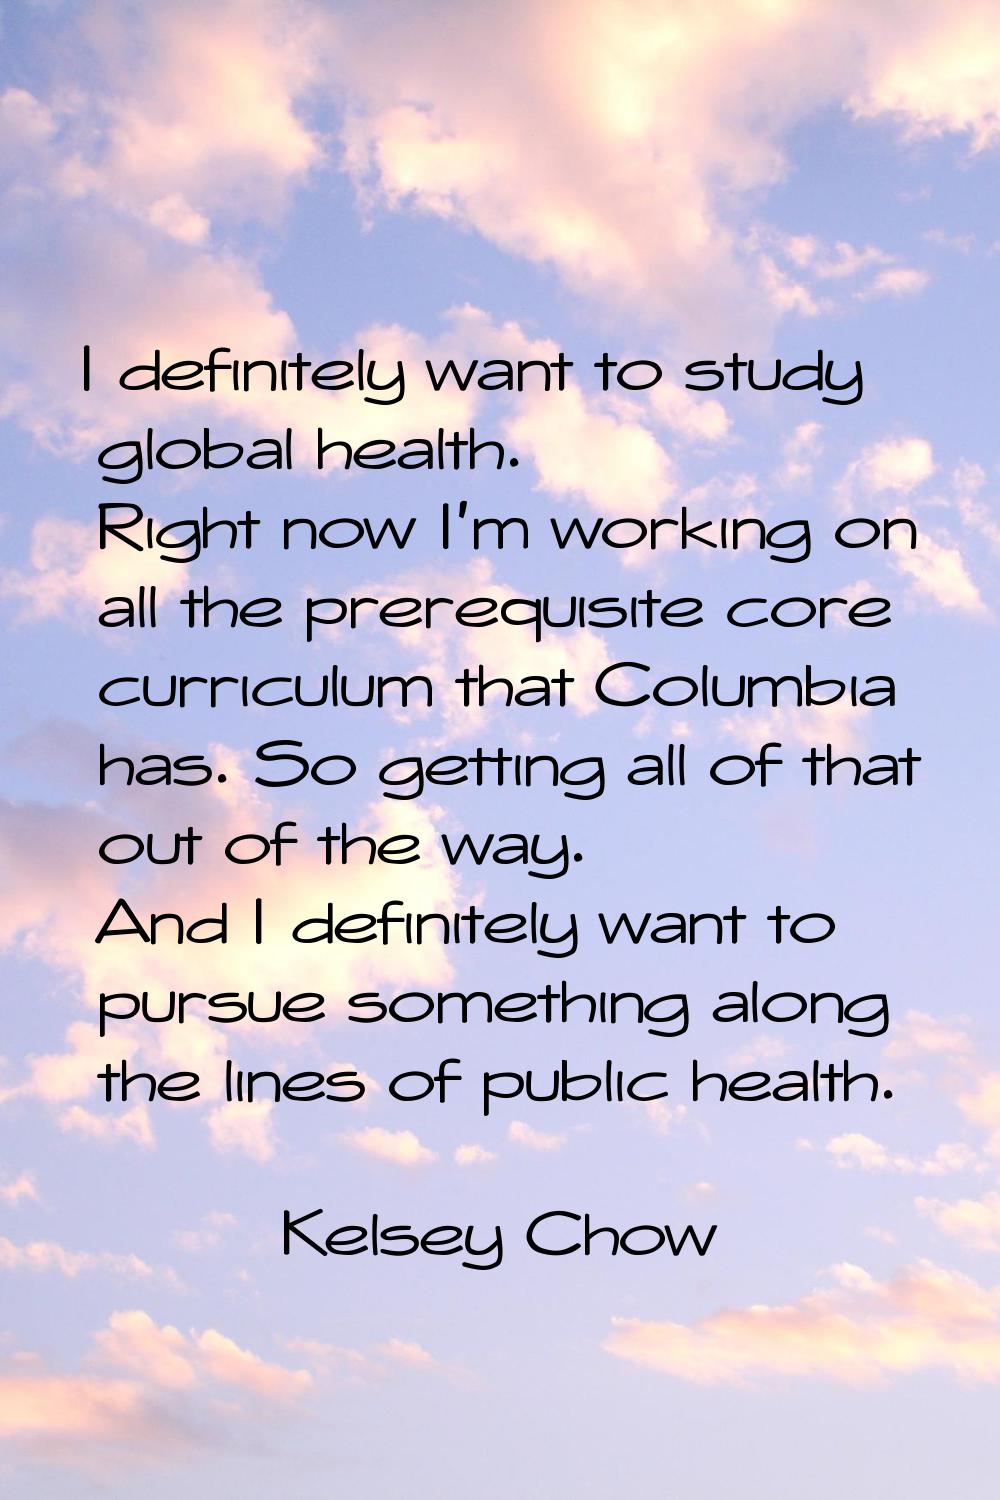 I definitely want to study global health. Right now I'm working on all the prerequisite core curric